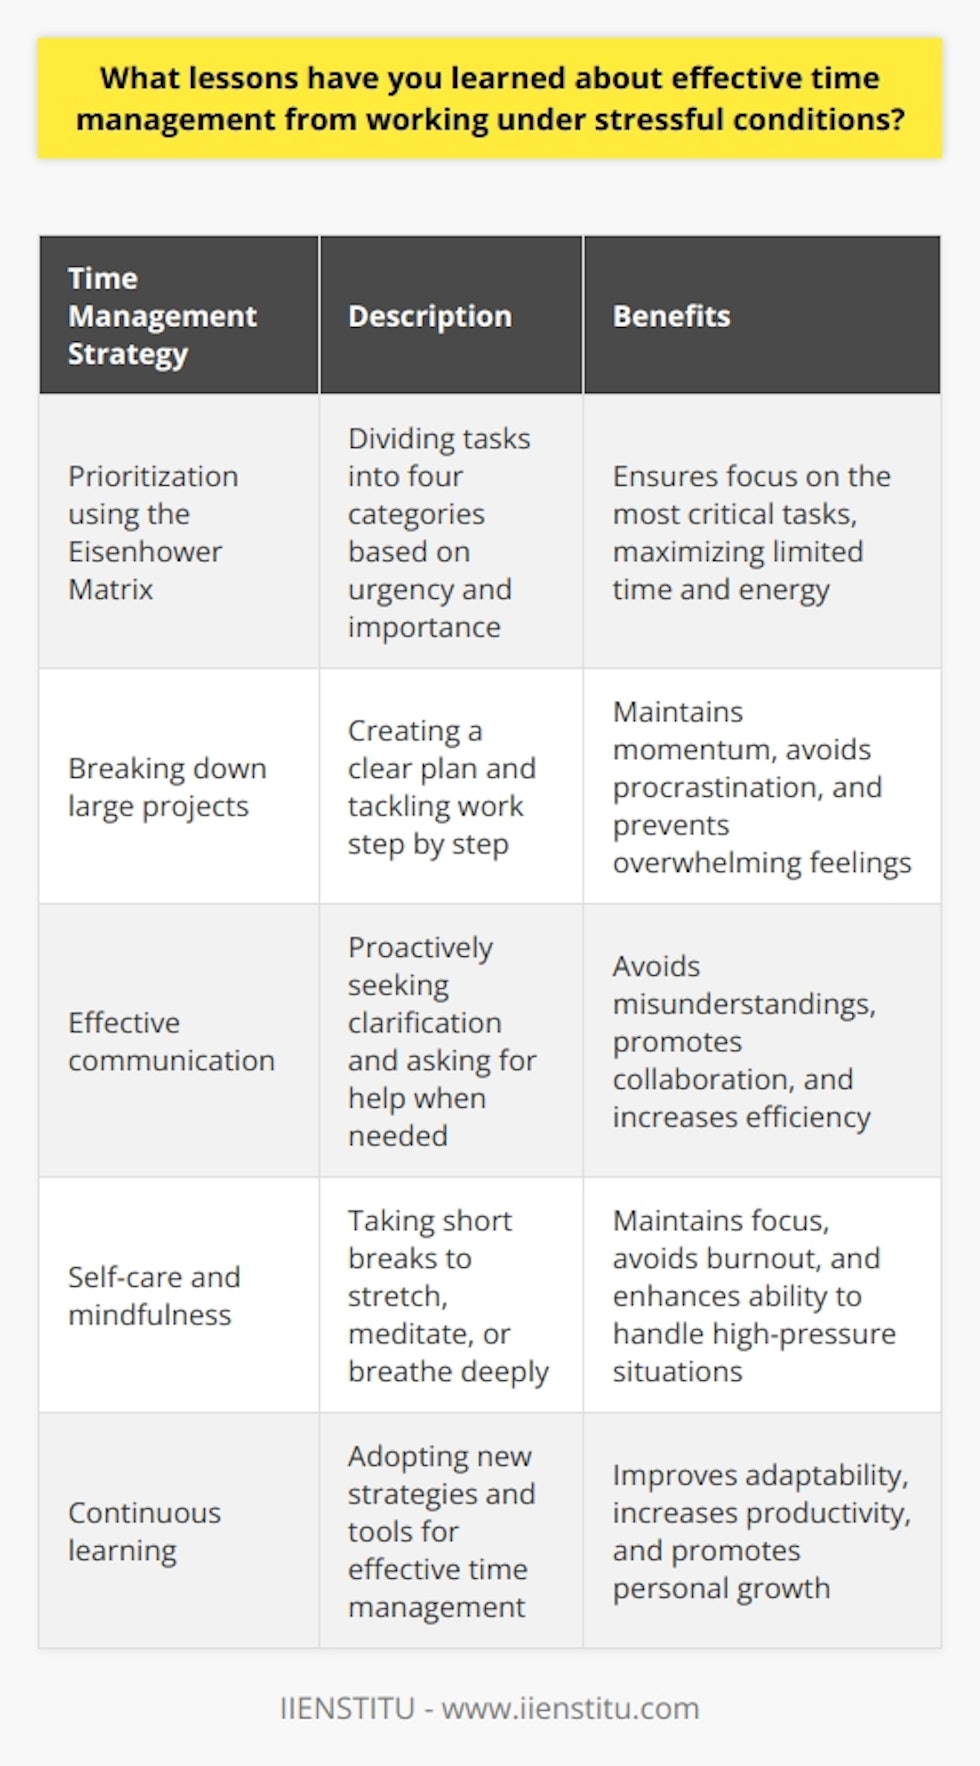 Throughout my career, Ive faced numerous high-pressure situations that have taught me valuable lessons about effective time management. One of the most important things Ive learned is the power of prioritization. When deadlines are looming and stress levels are high, its crucial to focus on the most critical tasks first. The Eisenhower Matrix I find the Eisenhower Matrix to be an incredibly helpful tool for prioritizing my workload. This simple framework divides tasks into four categories based on their urgency and importance. By tackling the urgent and important tasks first, I can ensure that Im making the most of my limited time and energy. Breaking Down Projects Another key strategy Ive developed is breaking large projects down into smaller, more manageable chunks. When a project seems overwhelming, its easy to procrastinate or become paralyzed by stress. By creating a clear plan and tackling the work step by step, I can maintain momentum and avoid getting overwhelmed. Effective Communication Effective communication is also essential when working under stressful conditions. Ive learned to be proactive in seeking clarification and asking for help when needed. By keeping my team members informed and collaborating closely, we can avoid misunderstandings and work more efficiently. Self-Care and Mindfulness Finally, Ive come to appreciate the importance of self-care and mindfulness in managing stress. Taking short breaks to stretch, meditate, or simply breathe deeply can help me maintain focus and avoid burnout. By prioritizing my own well-being, Im better equipped to handle the demands of a high-pressure work environment. These lessons have served me well throughout my career, and Im confident that they will continue to be valuable assets as I take on new challenges and responsibilities.